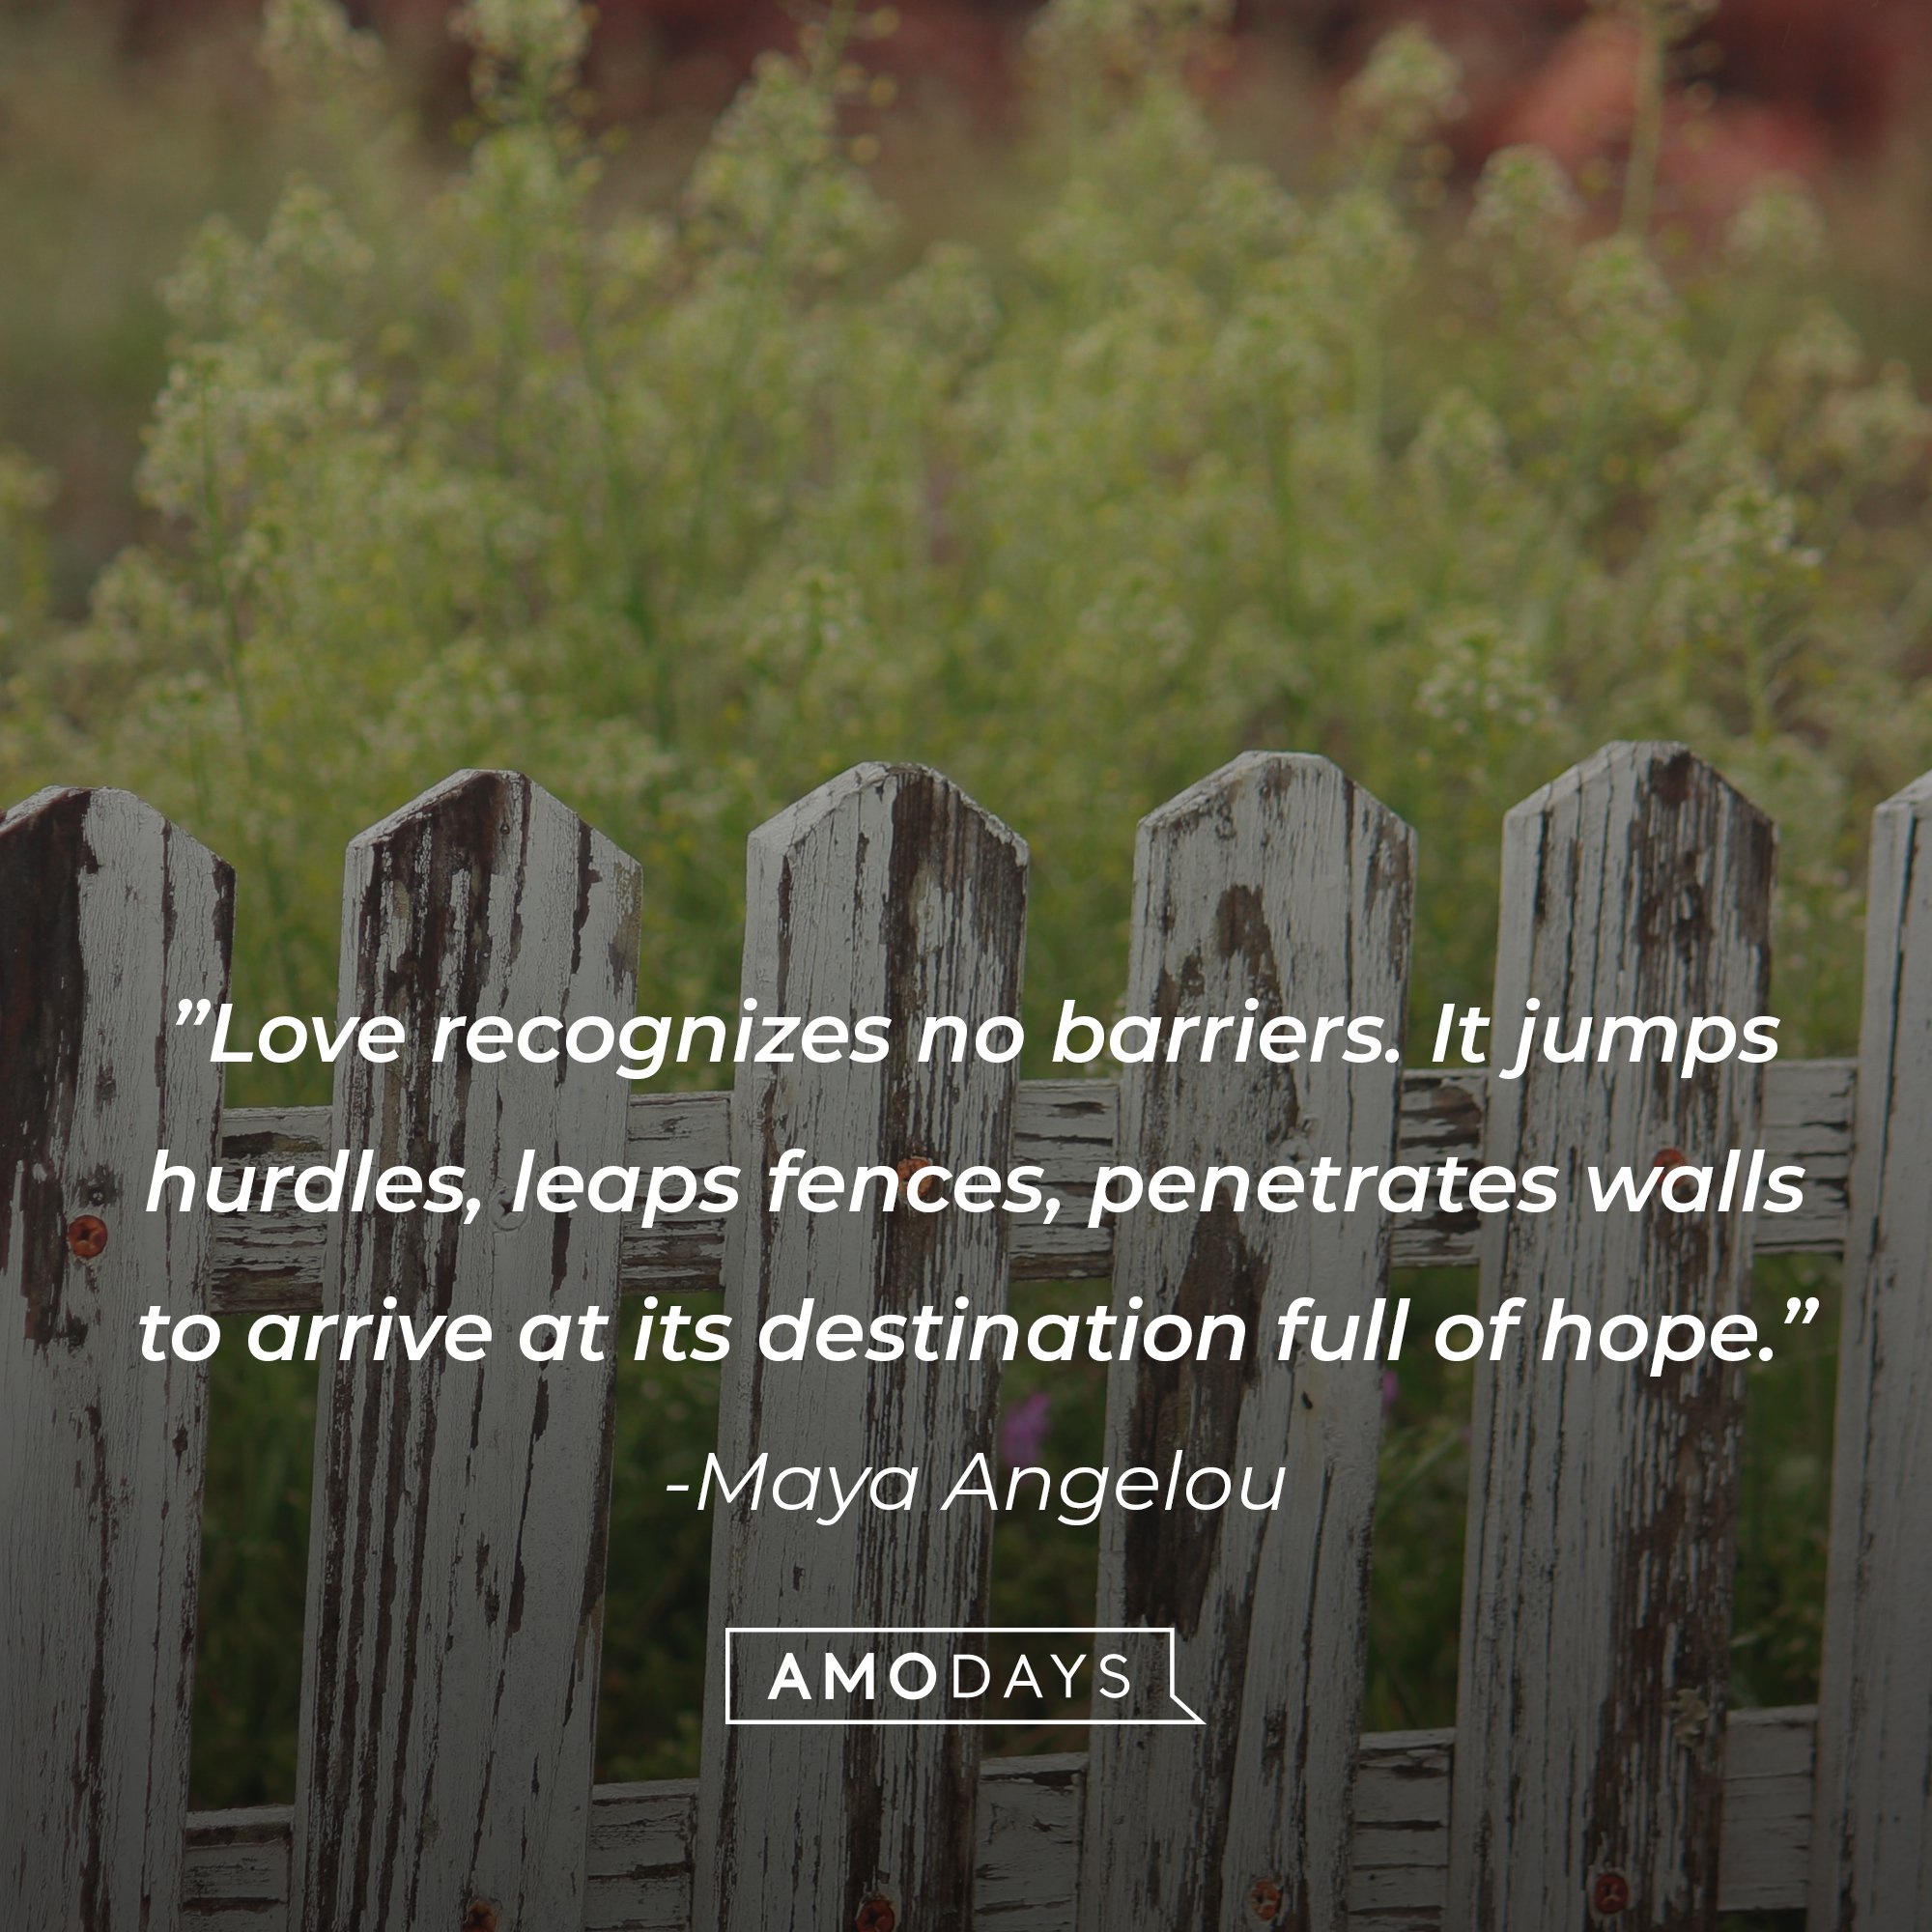 Maya Angelou's quote: ”Love recognizes no barriers. It jumps hurdles, leaps fences, penetrates walls to arrive at its destination full of hope.” | Image: AmoDays